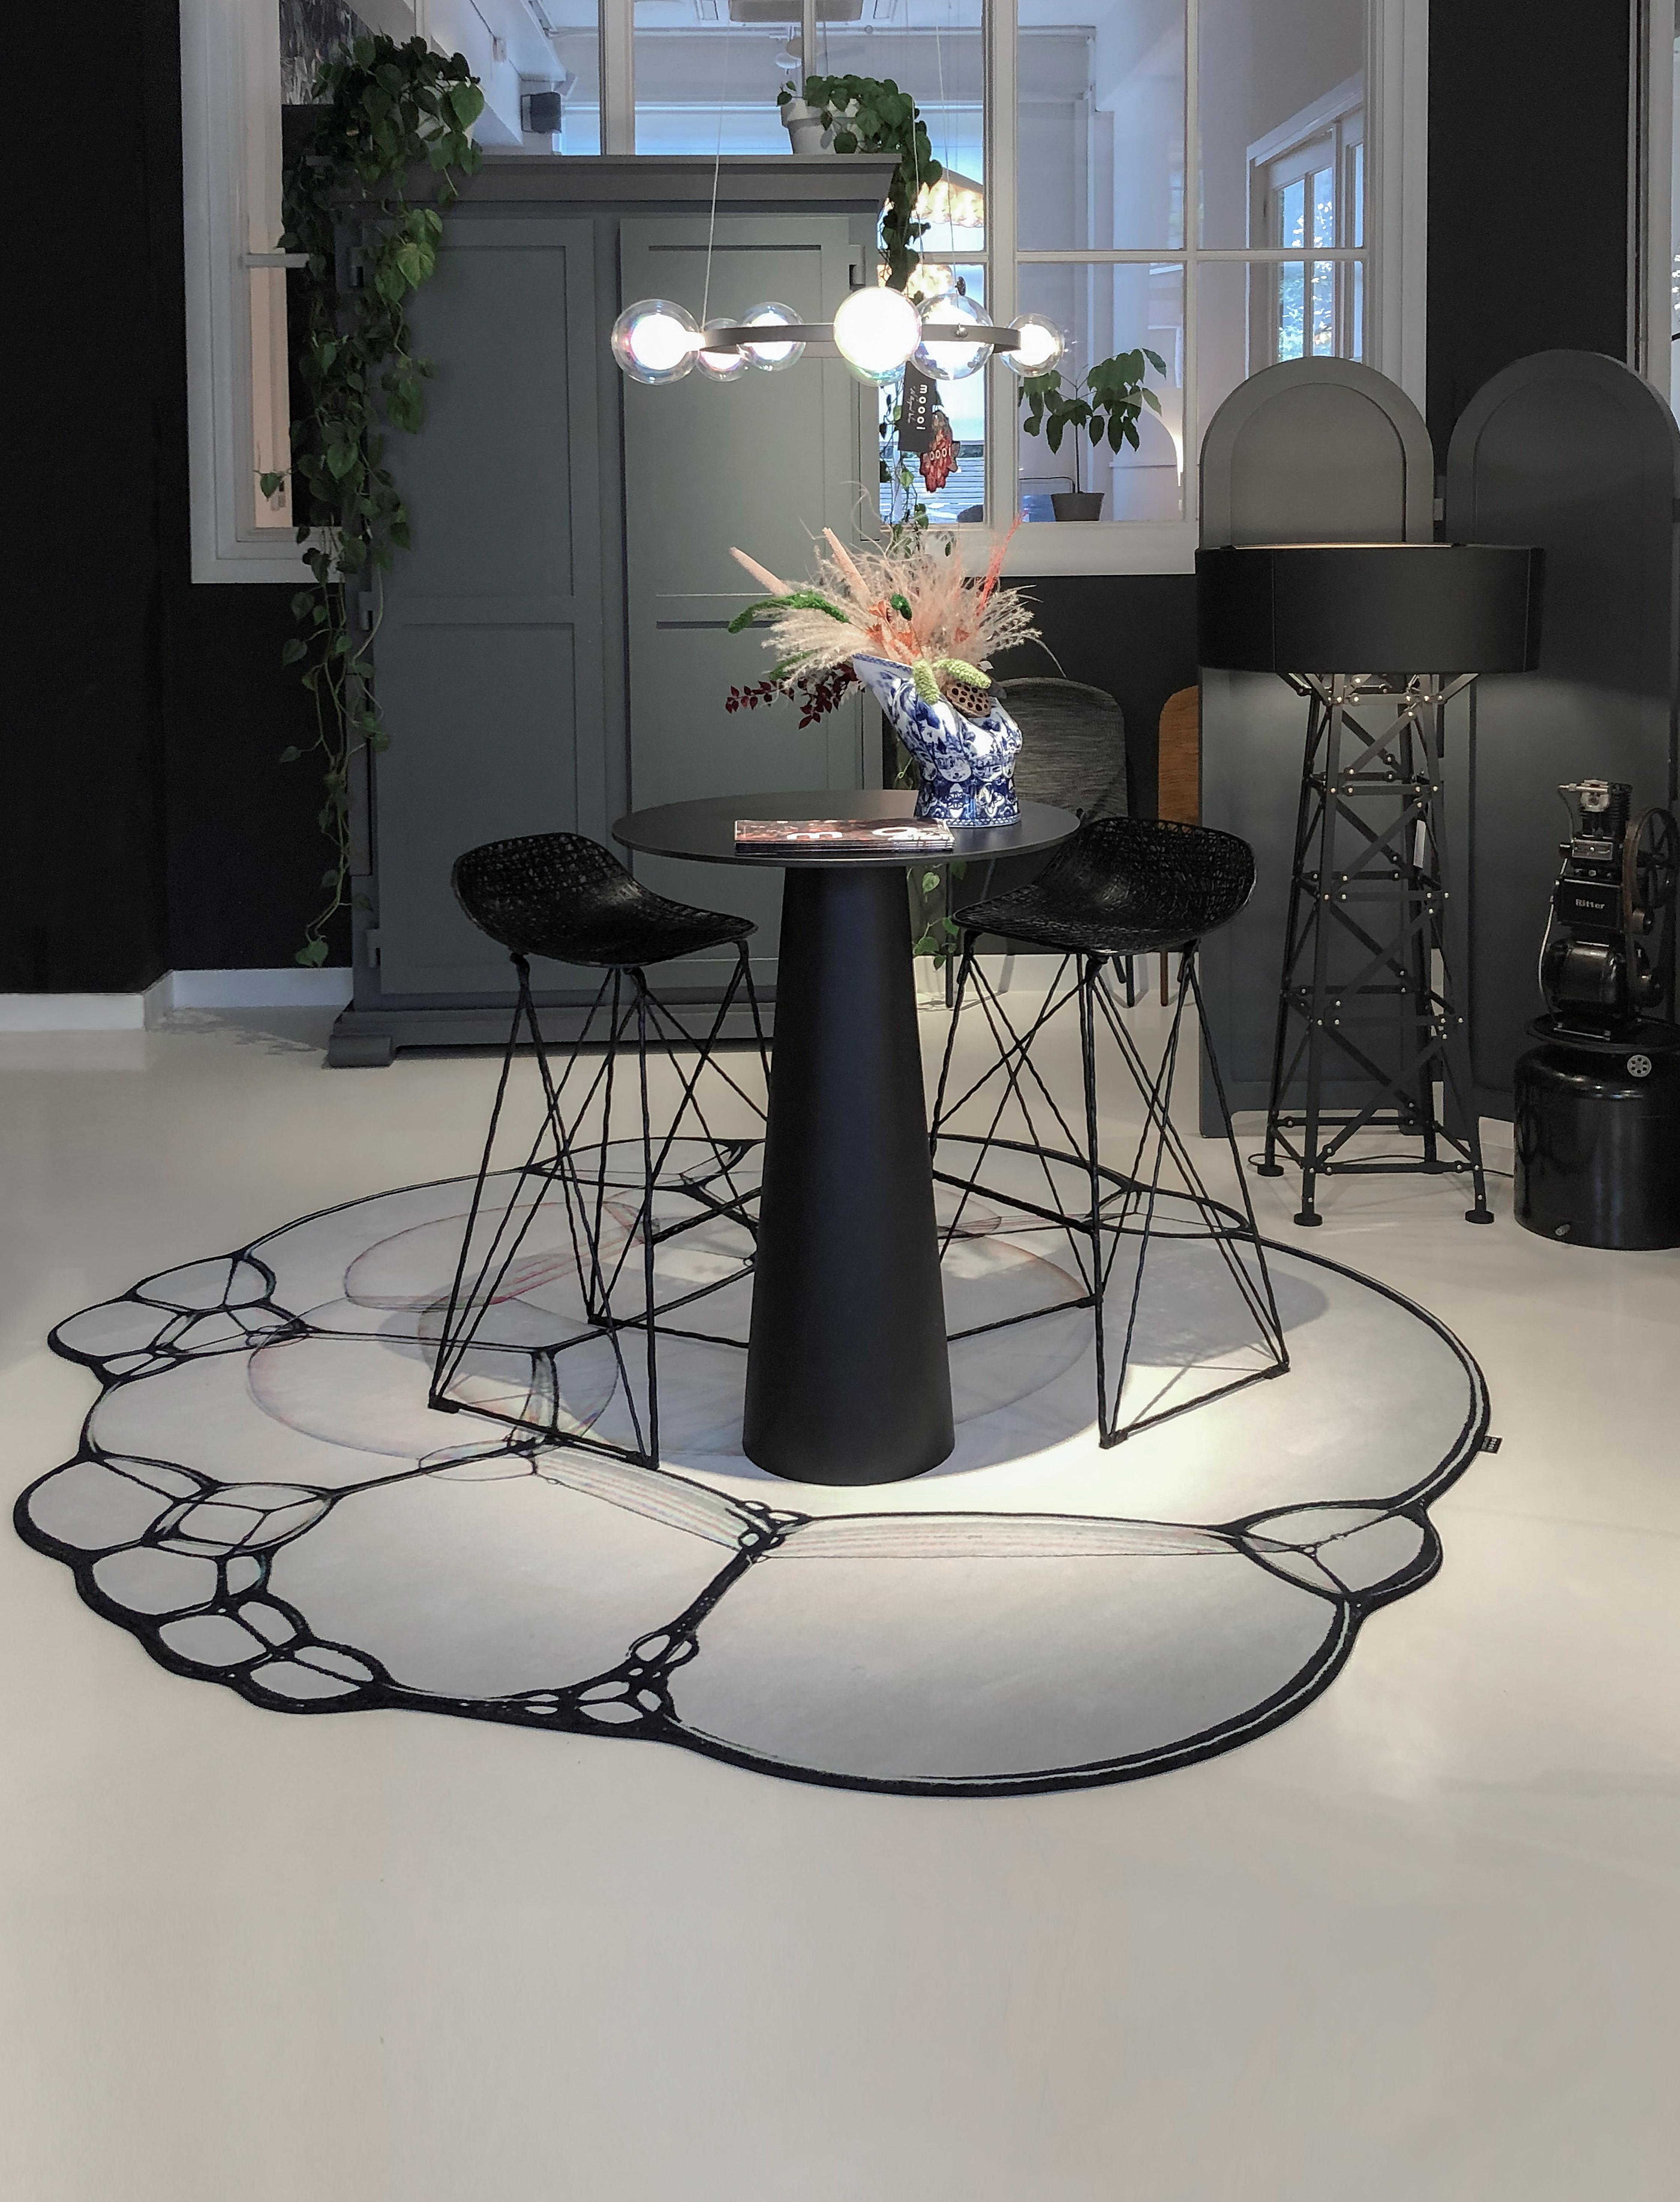 Moooi Large Bubble Oil Zoom rug in Low Pile Polyamide by Sjoerd Vroonland

Sjoerd Vroonland is a master of revised crafts and a remarkable furniture designer. Best known for his “extension chair” that became an instant icon of the Dutch Design